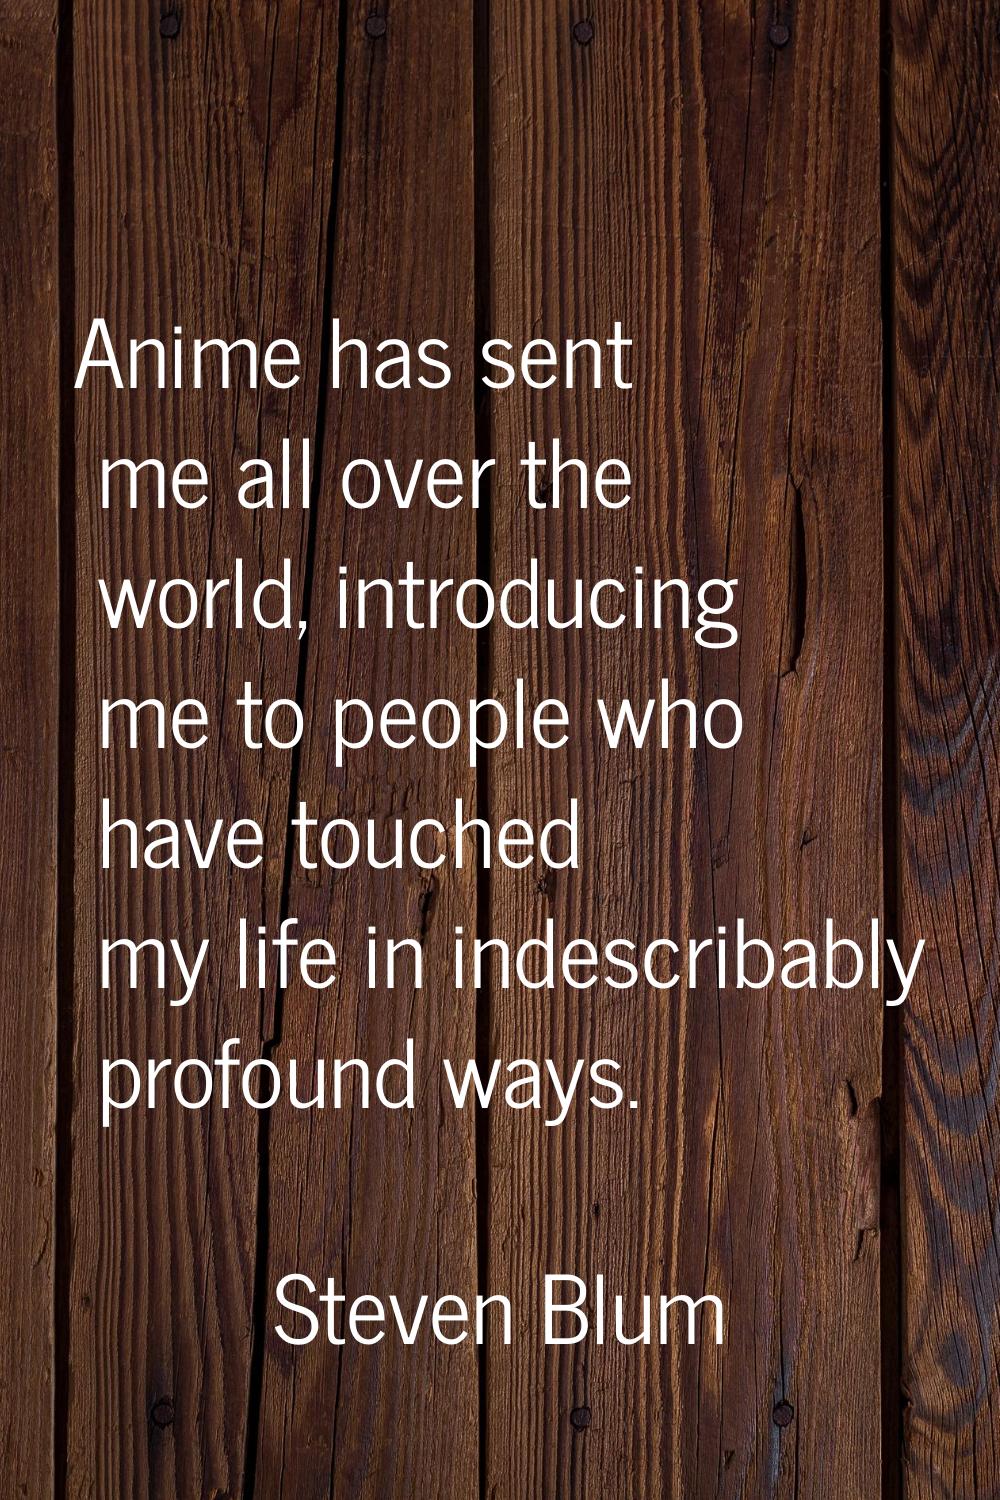 Anime has sent me all over the world, introducing me to people who have touched my life in indescri